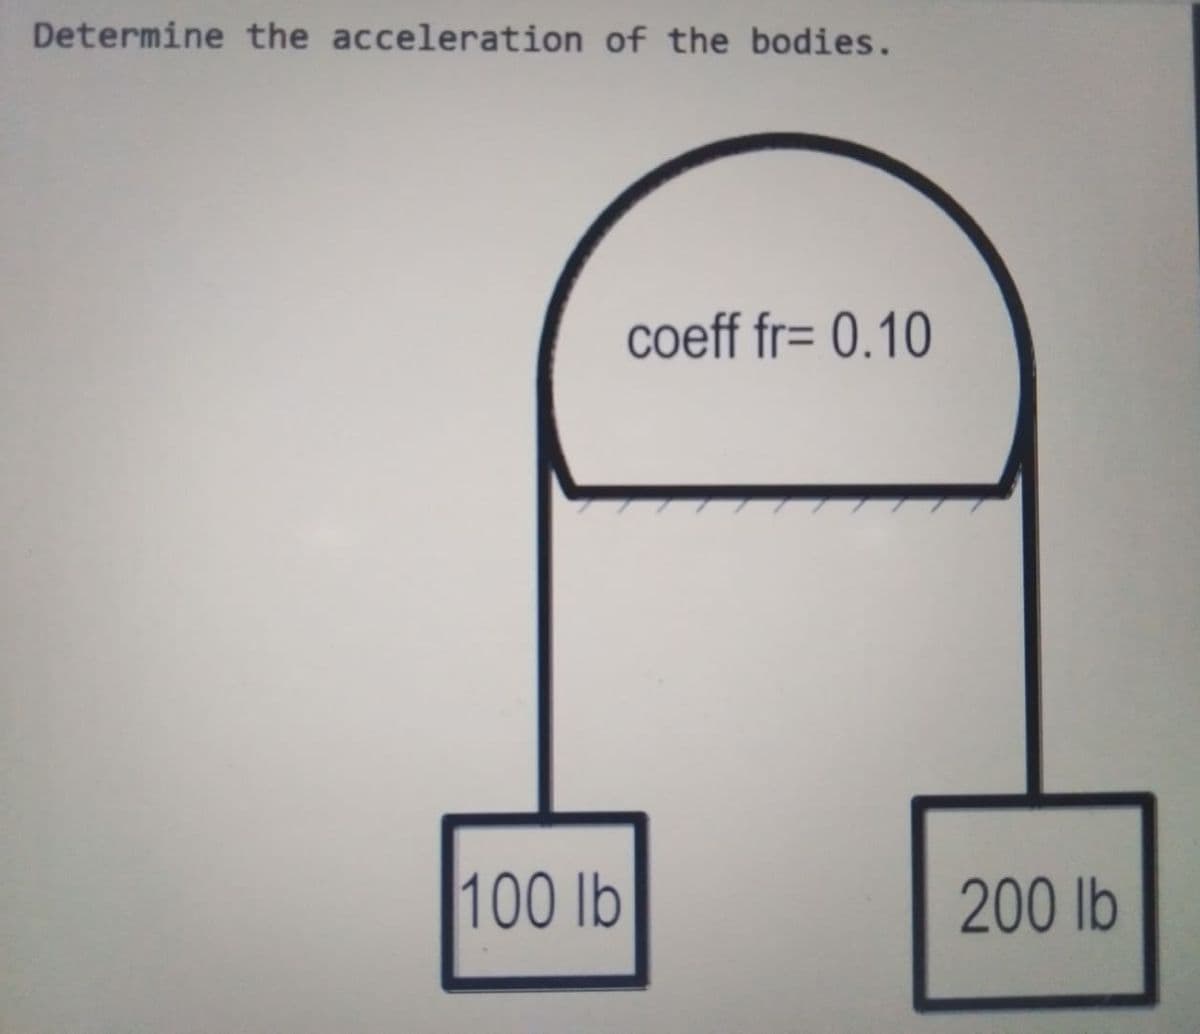 Determine the acceleration of the bodies.
coeff fr= 0.10
100 lb
200 lb
